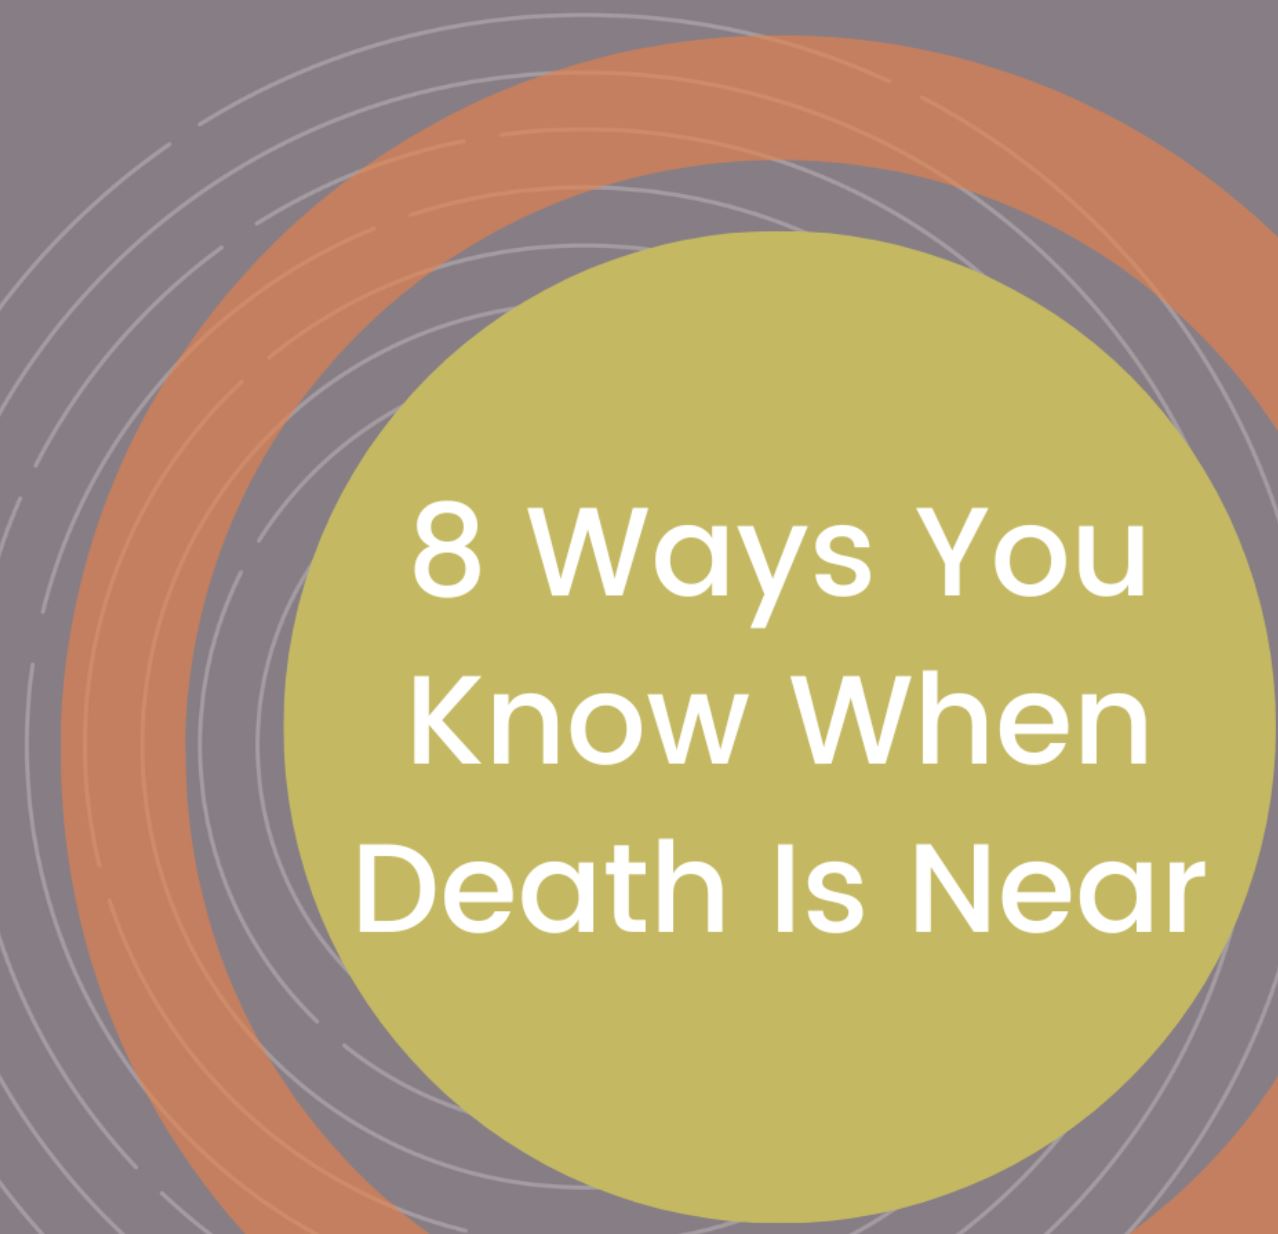 8 Ways You Know When Death Is Near